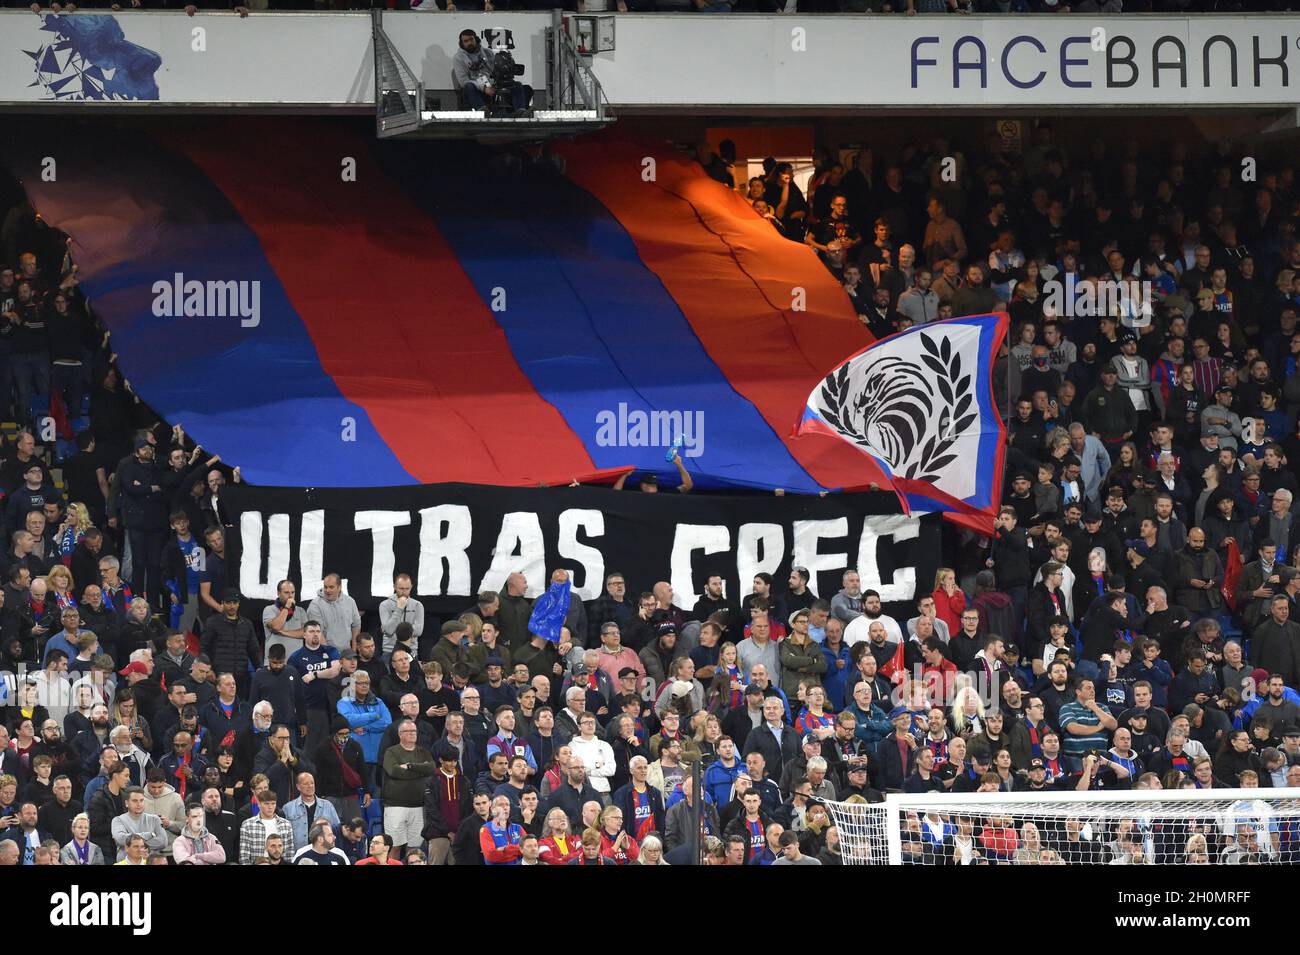 Palace fans the Ultras during the Premier League match between Crystal Palace and Brighton & Hove Albion at Selhurst Park  ,London , UK - 27th September 2021 -  Editorial use only. No merchandising. For Football images FA and Premier League restrictions apply inc. no internet/mobile usage without FAPL license - for details contact Football Dataco Stock Photo